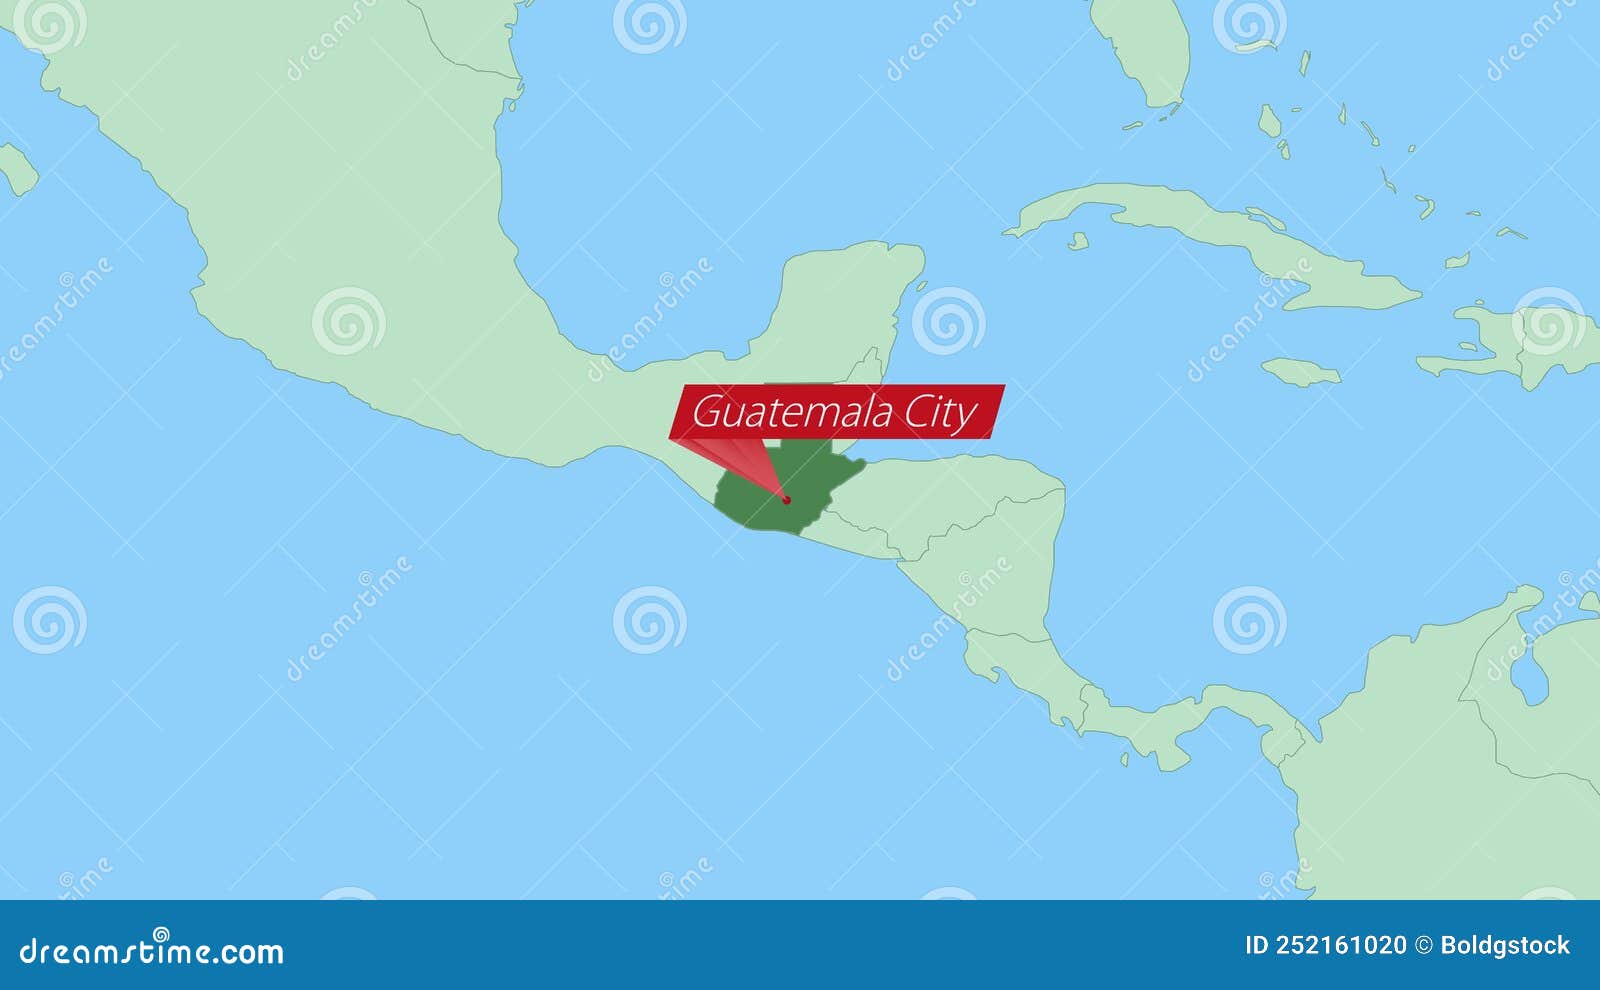 map of guatemala with pin of country capital